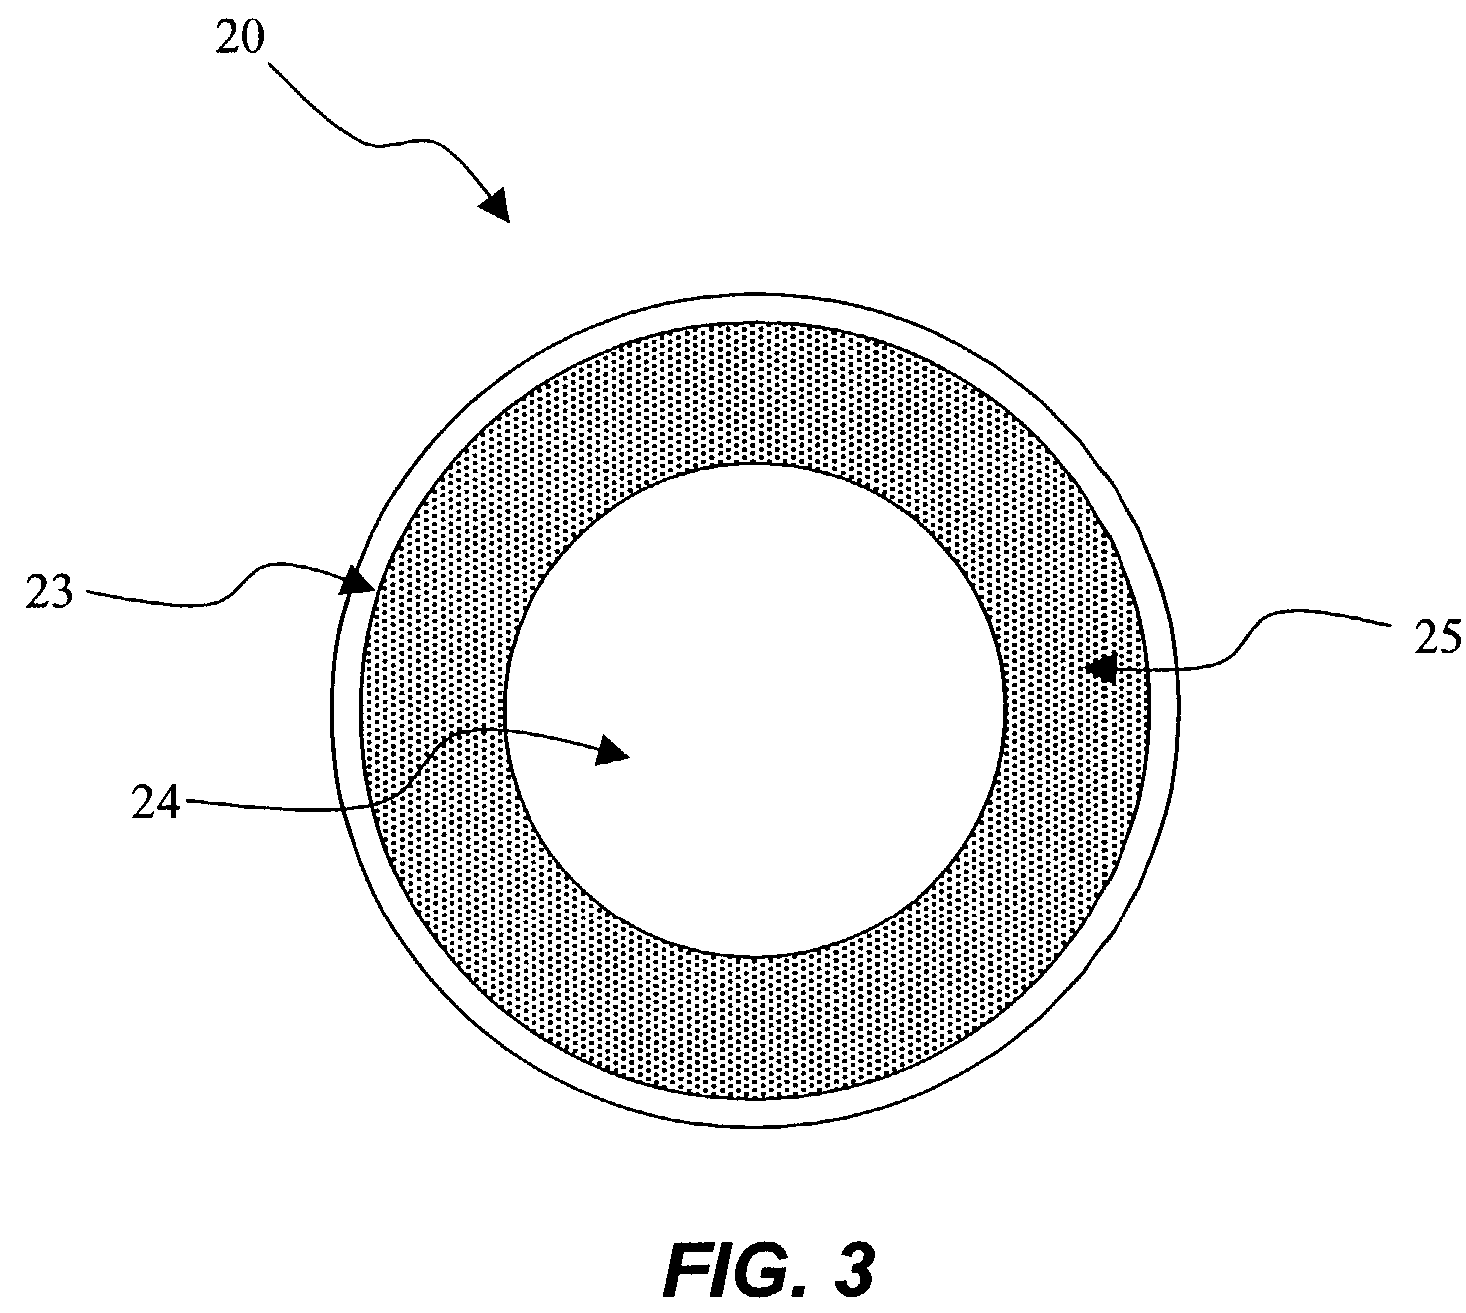 Highly neutralized polymer golf ball compositions including oxa acids and methods of making same